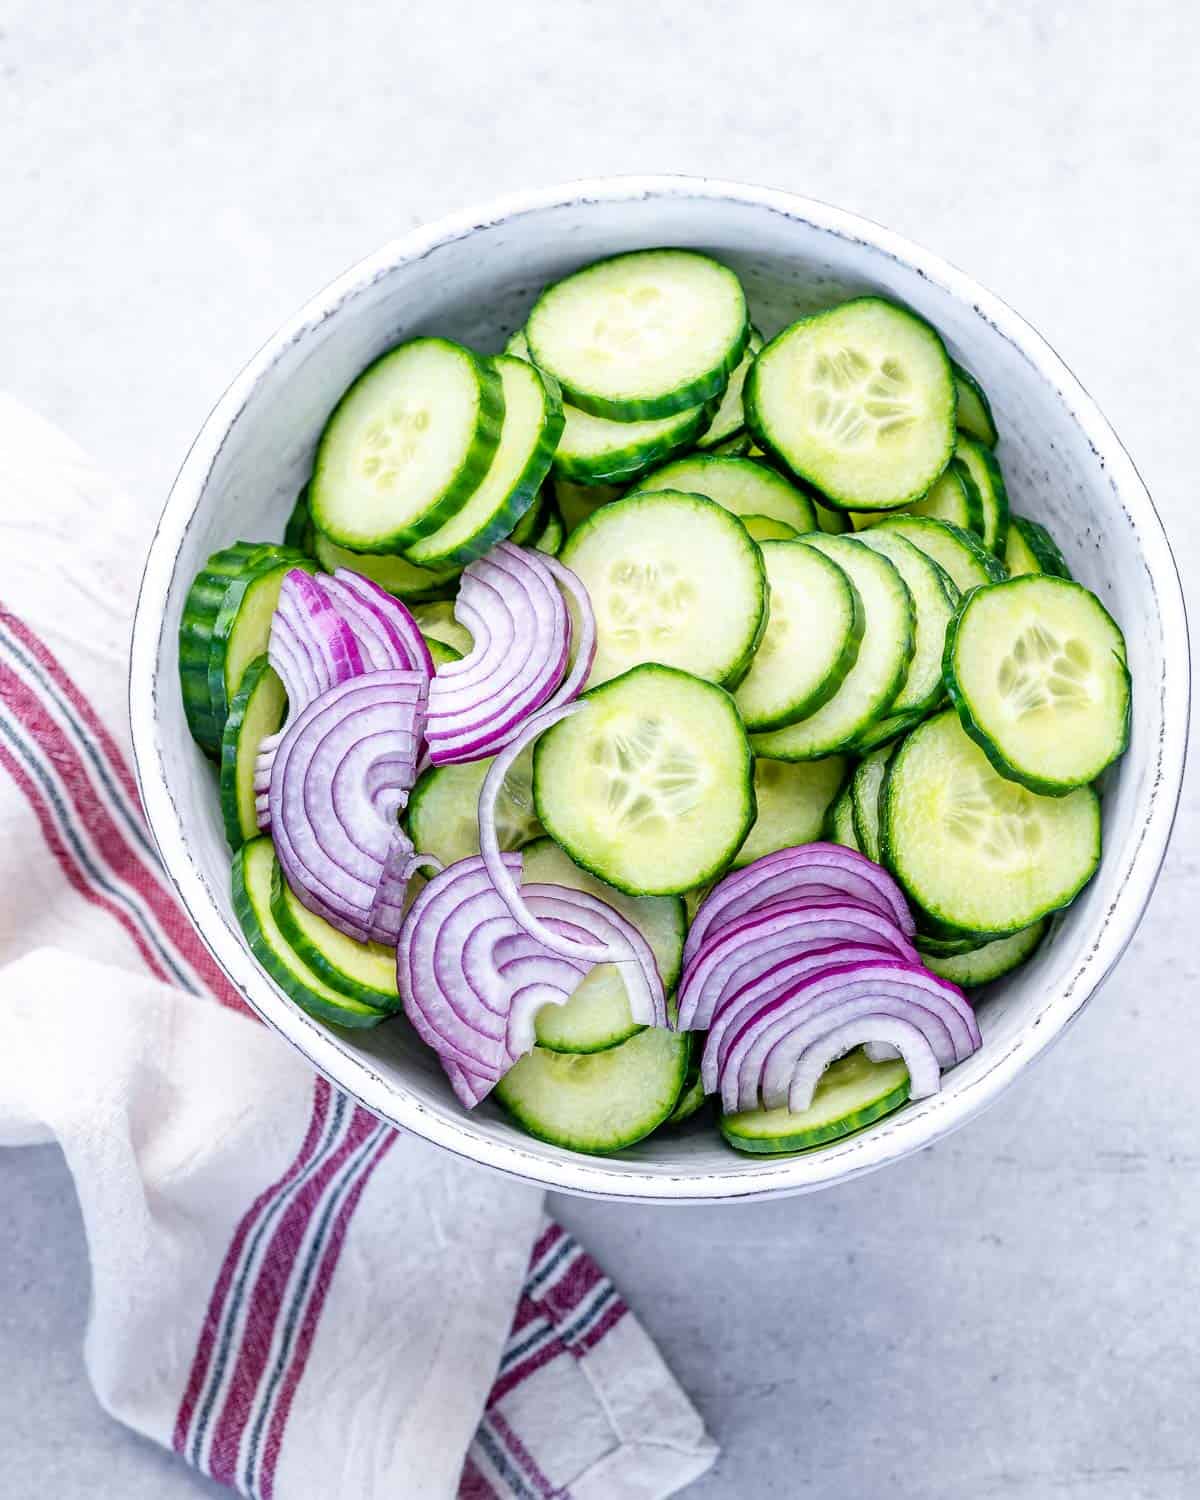 red onions and cucumber slices in bowl